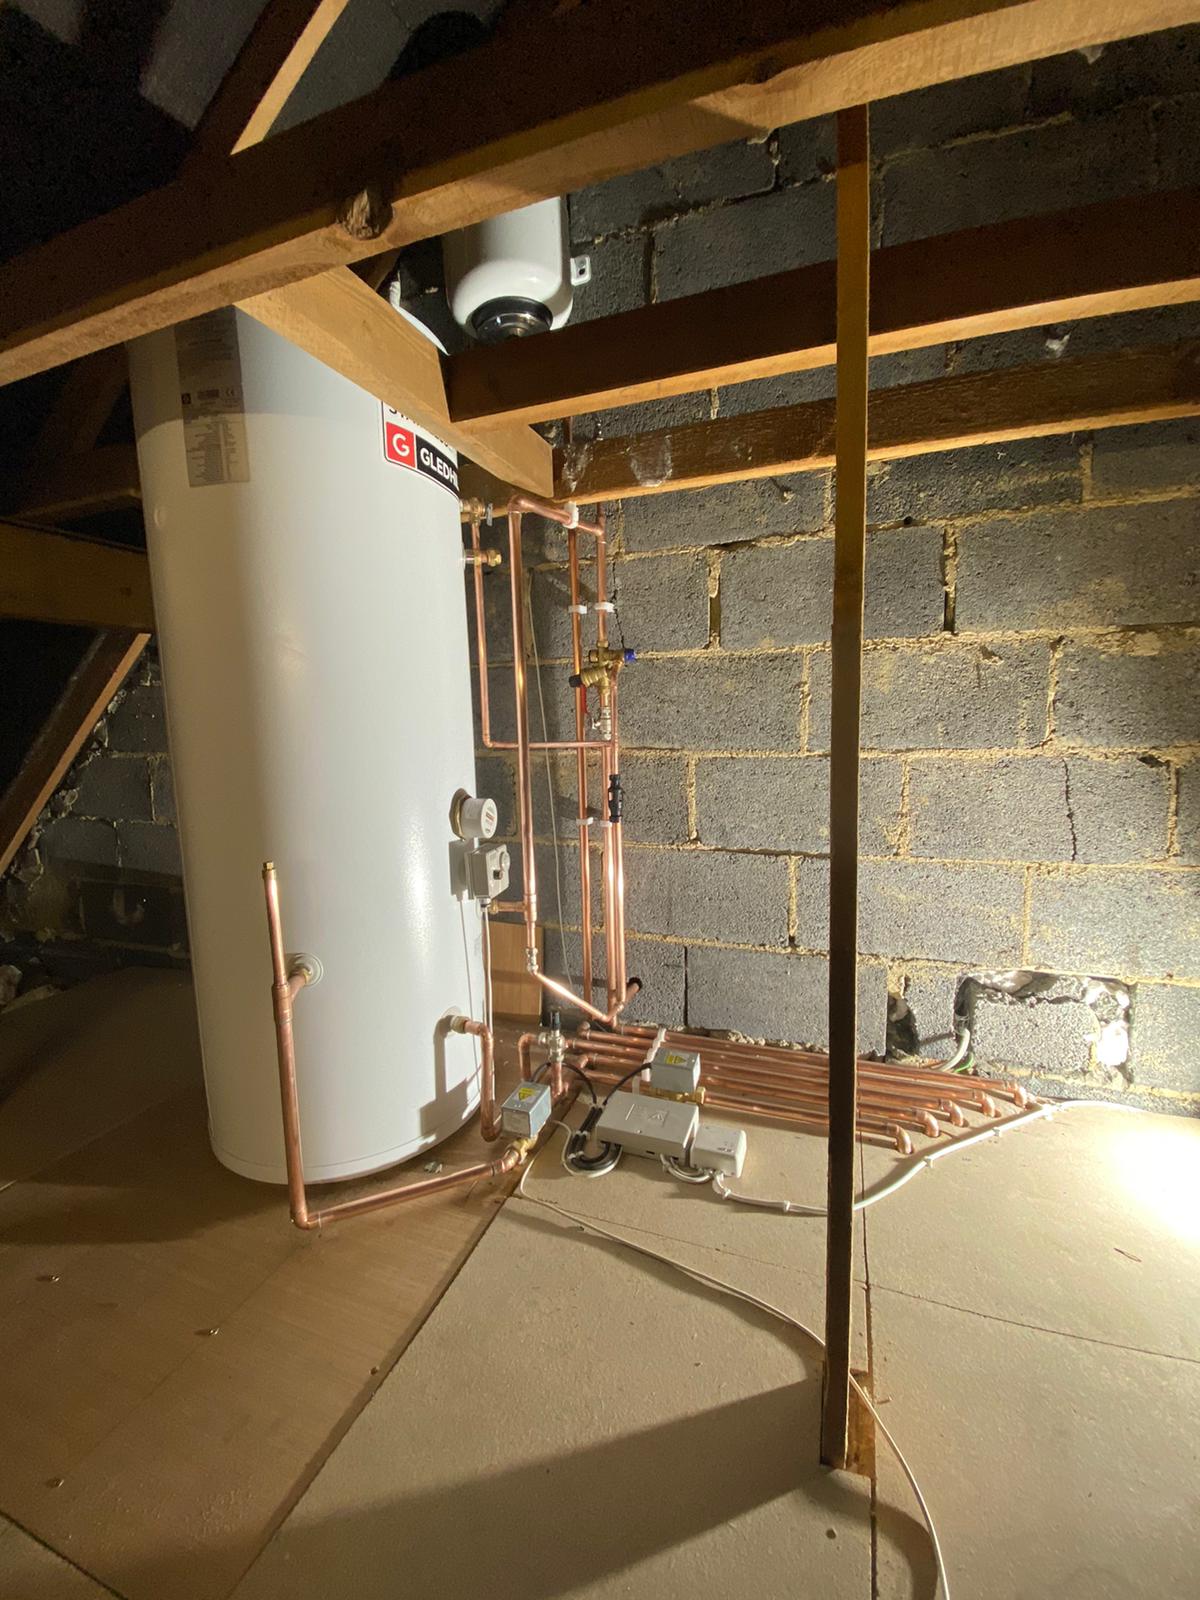 unvented hot water cylinder with exposed pipework and components in loft space.